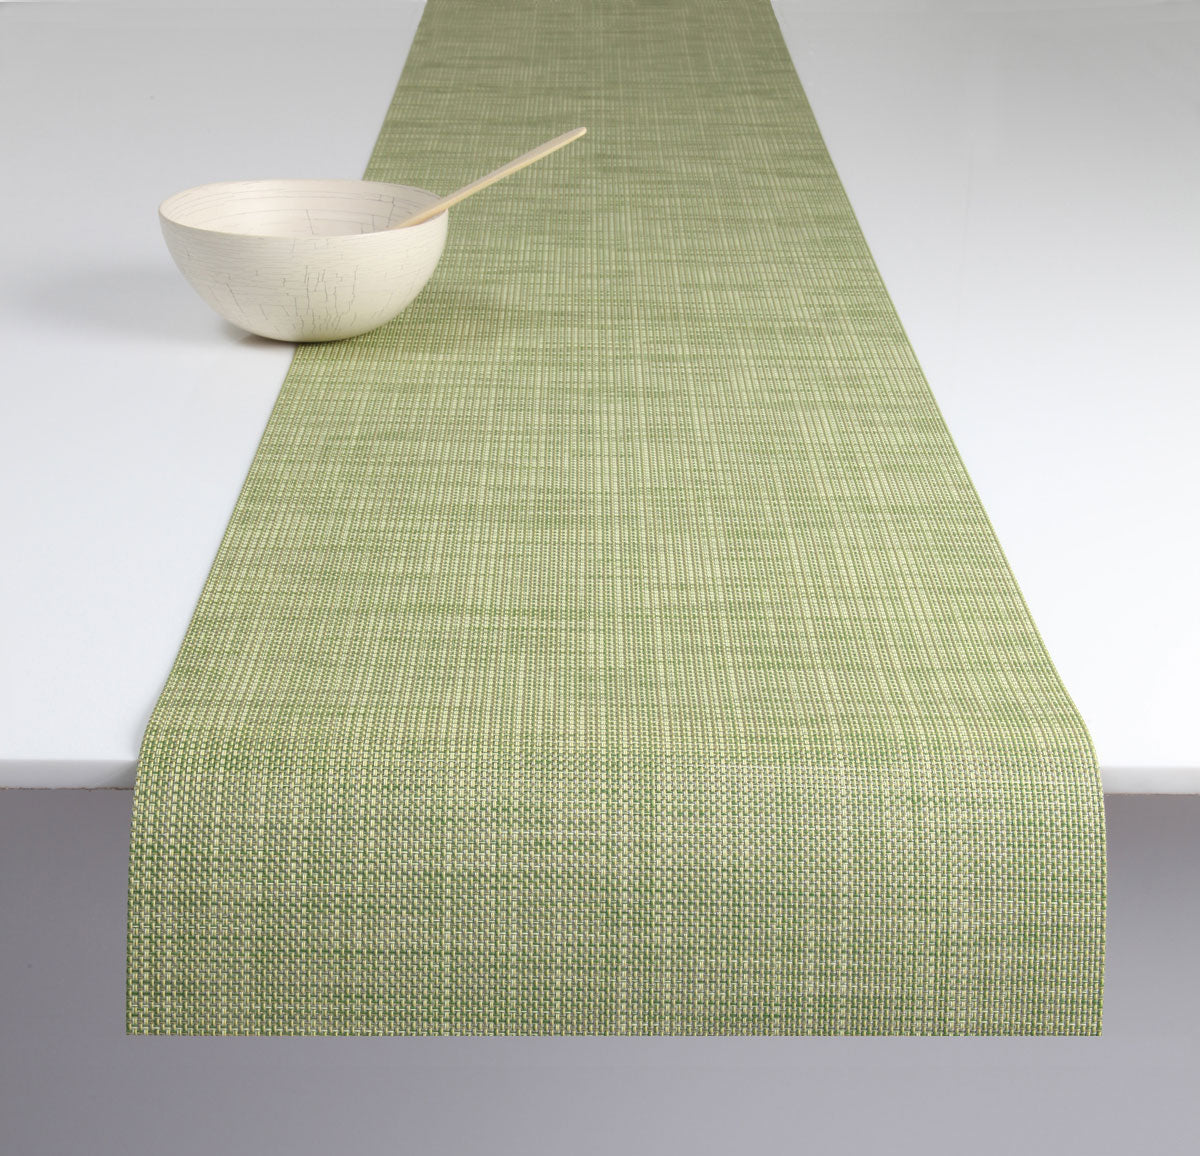 Chilewich Placemat - Mini Basketweave - Dill